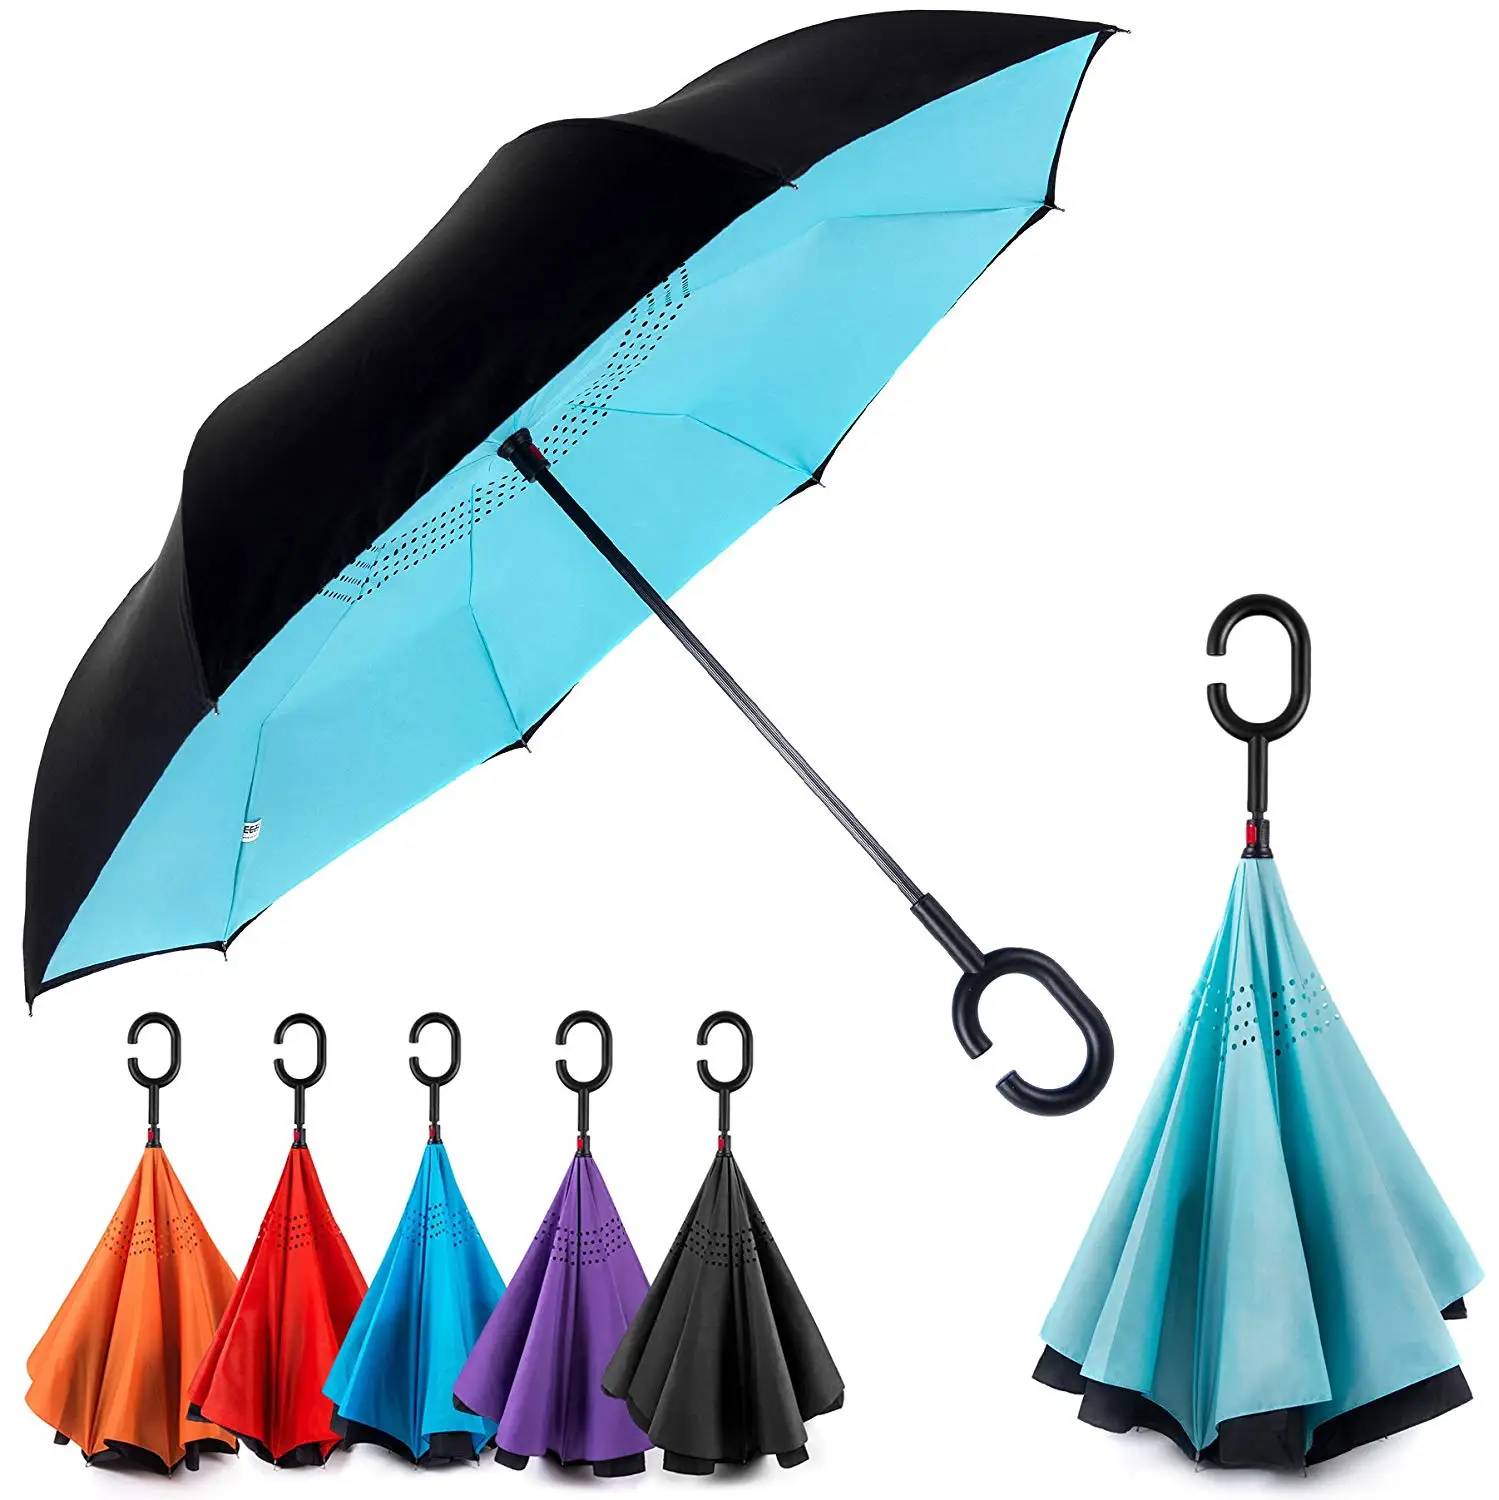 Double Layer Inverted Umbrellas Reverse Folding Umbrella Windproof UV Protection Big Straight Umbrella Inside Out Upside Down for Car Rain Outdoor With C-Shaped Handle 